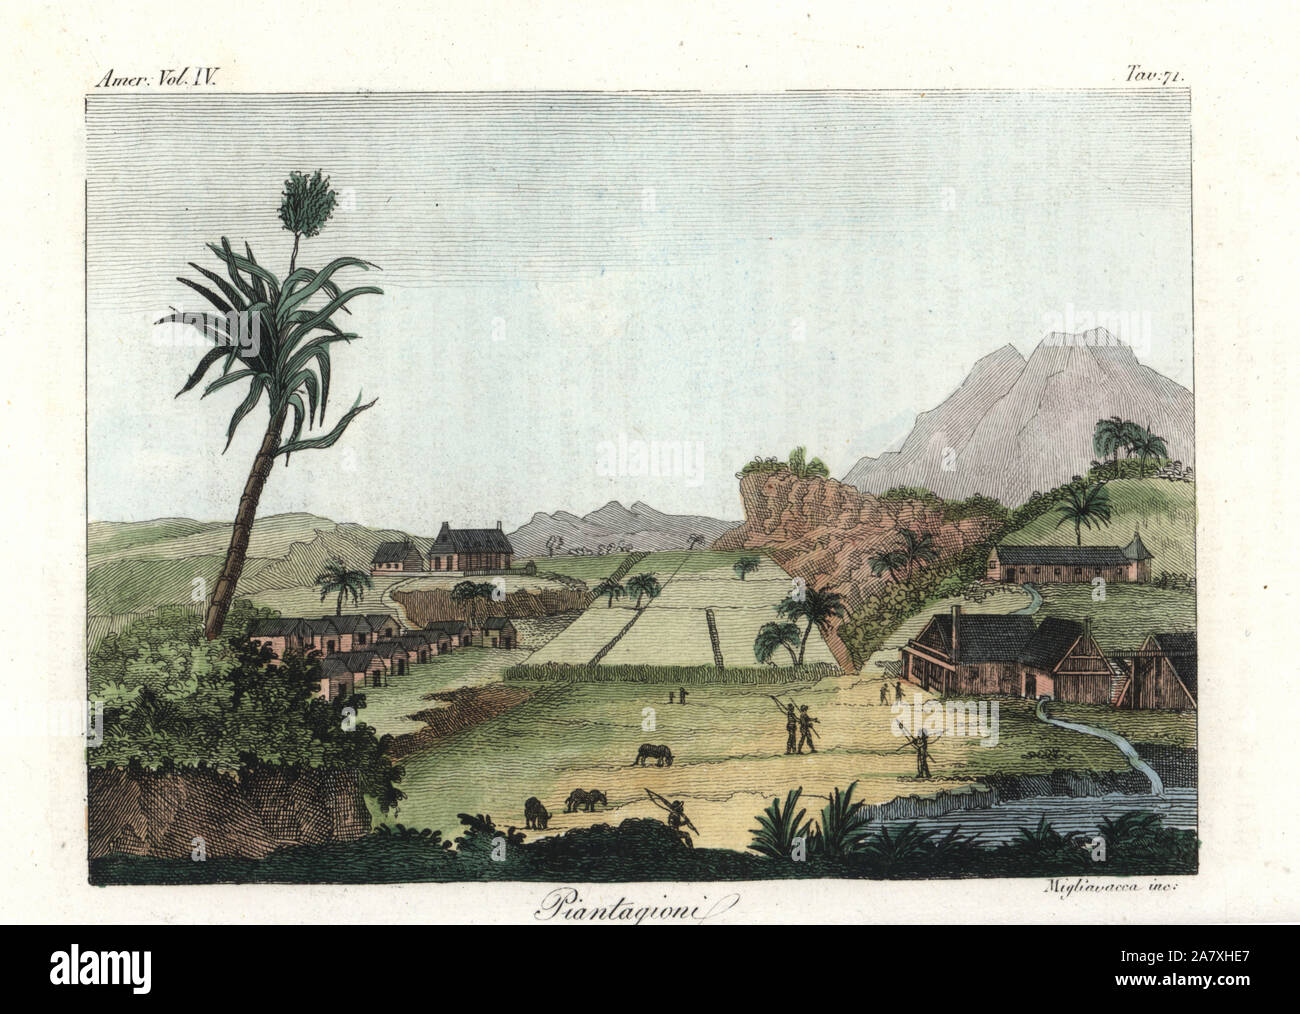 African slaves working on a sugarcane plantation in the West Indies. Handcoloured copperplate engraving by Migliavacca from Giulio Ferrrario's Costumes Antique and Modern of All Peoples (Il Costume Antico e Moderno di Tutti i Popoli), Florence, 1842. Stock Photo